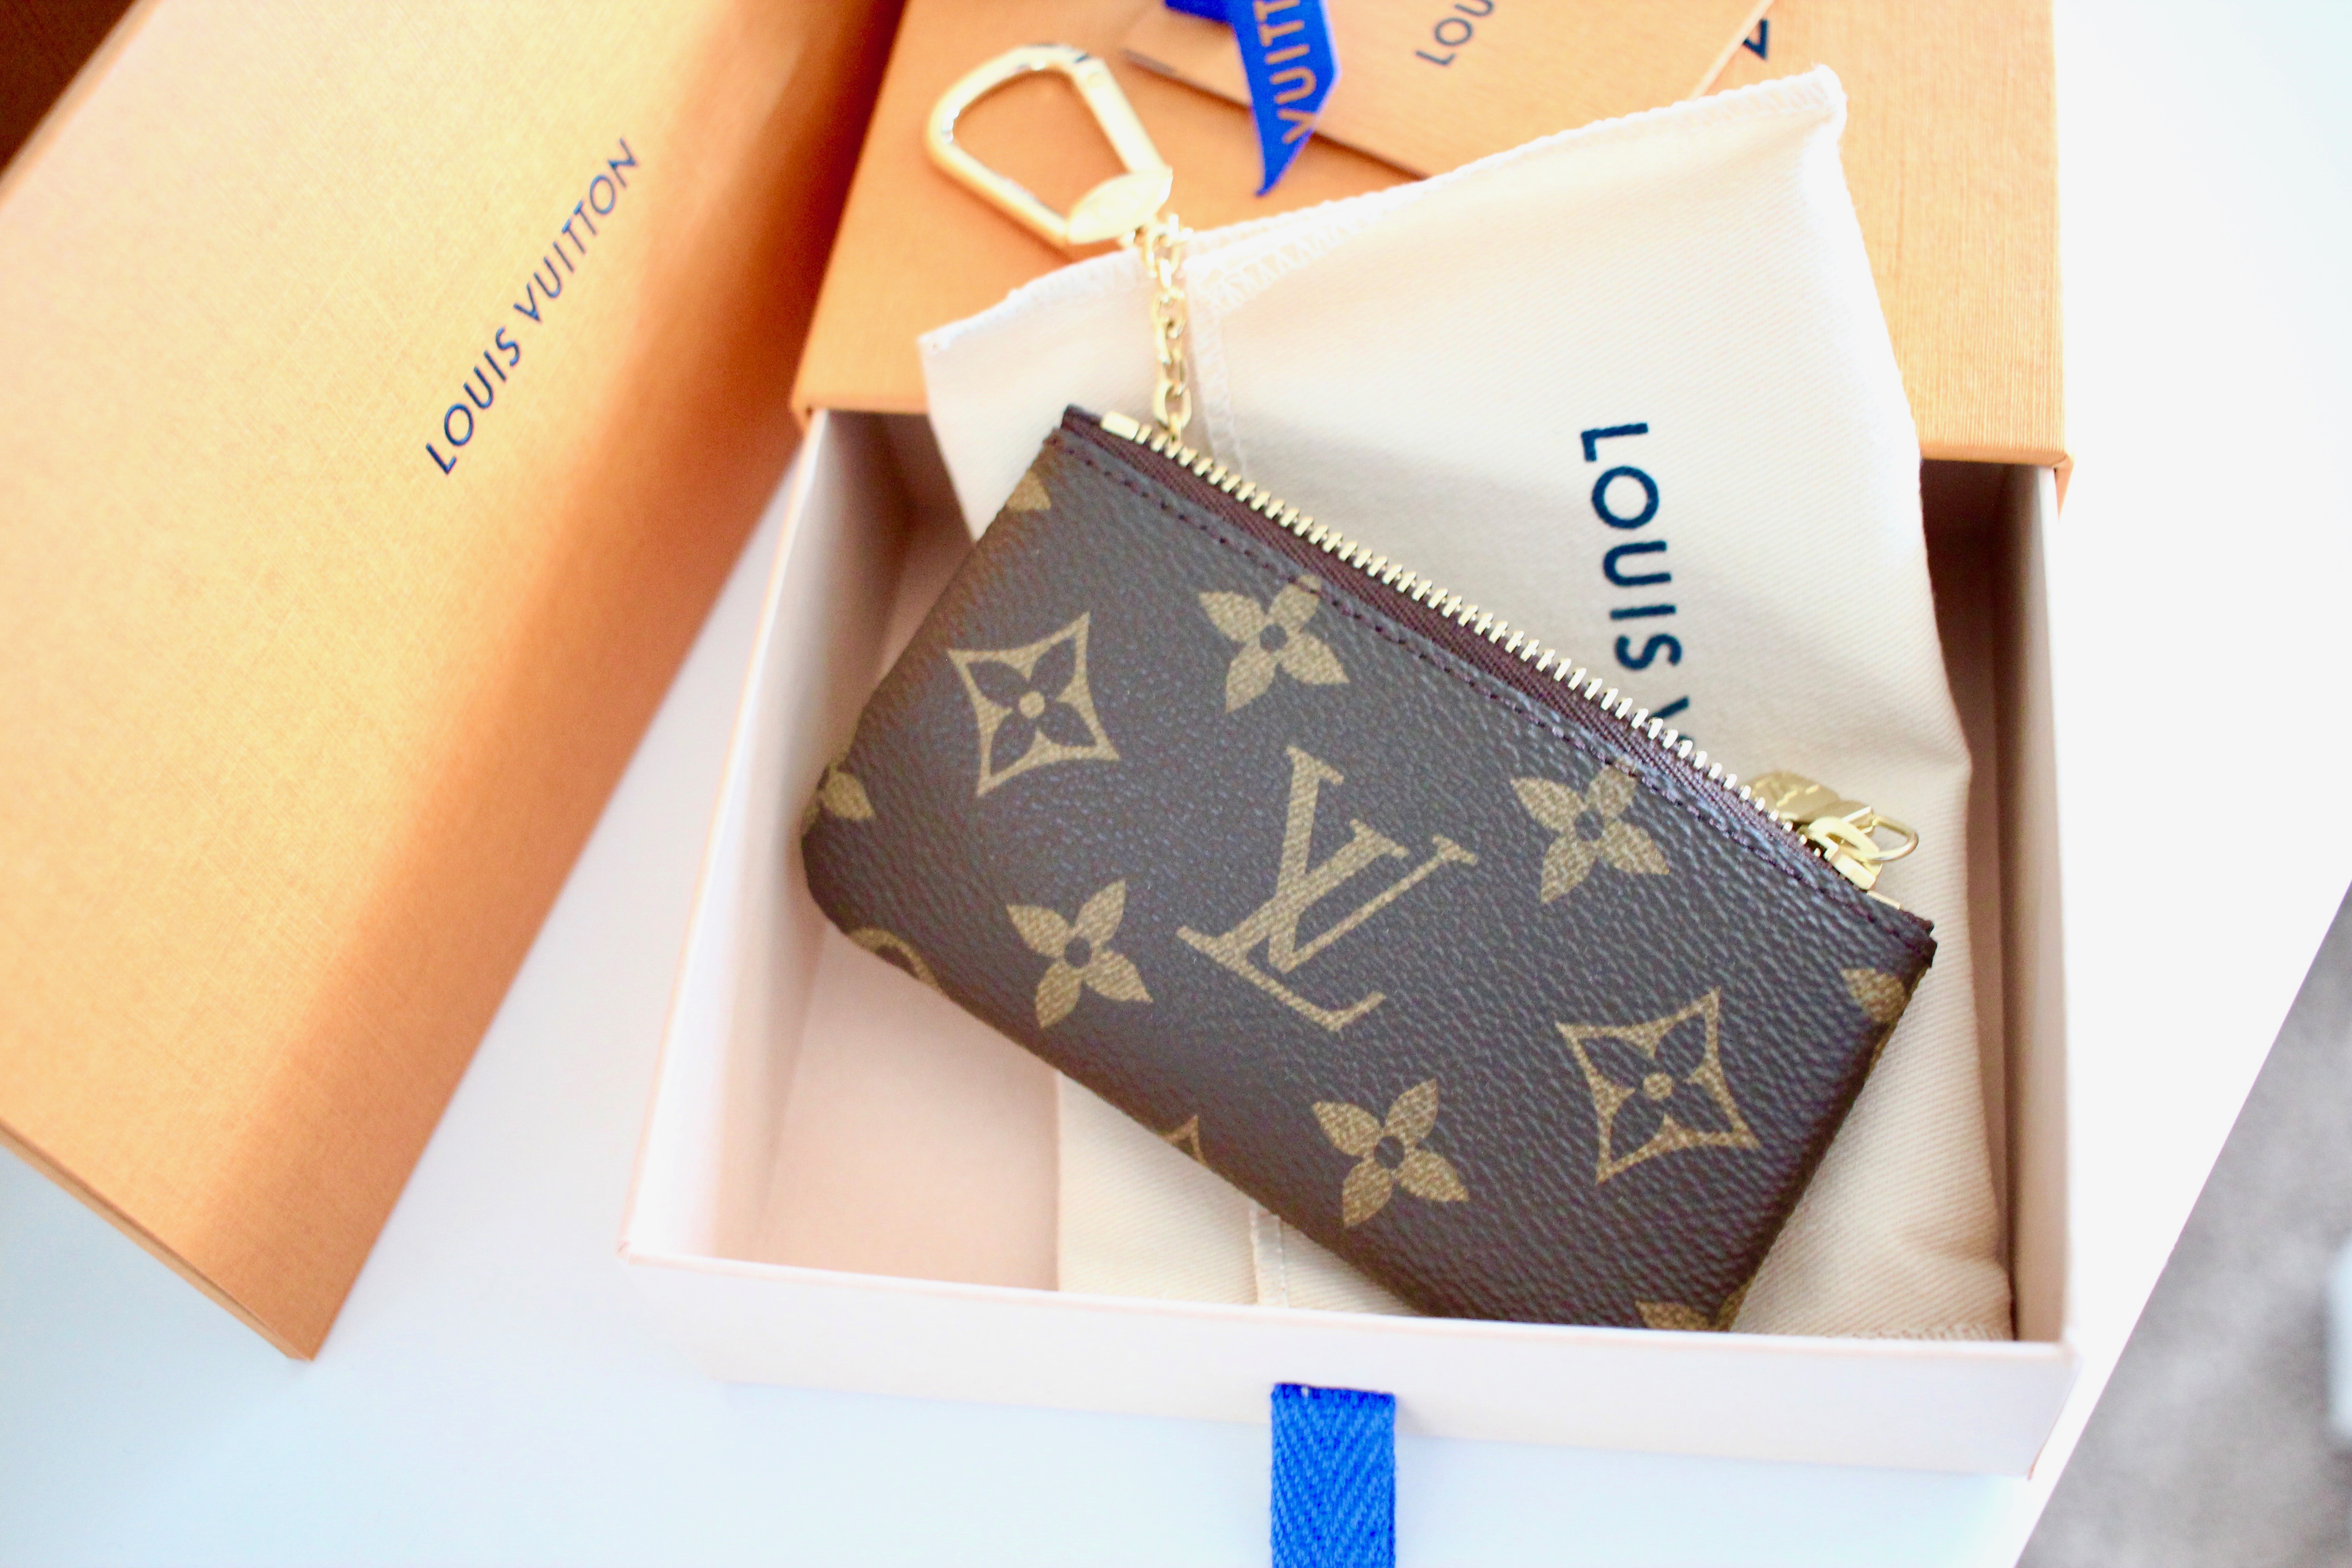 Louis Vuitton Key Pouch Unboxing & Review 2020 - Returned Immediately! 